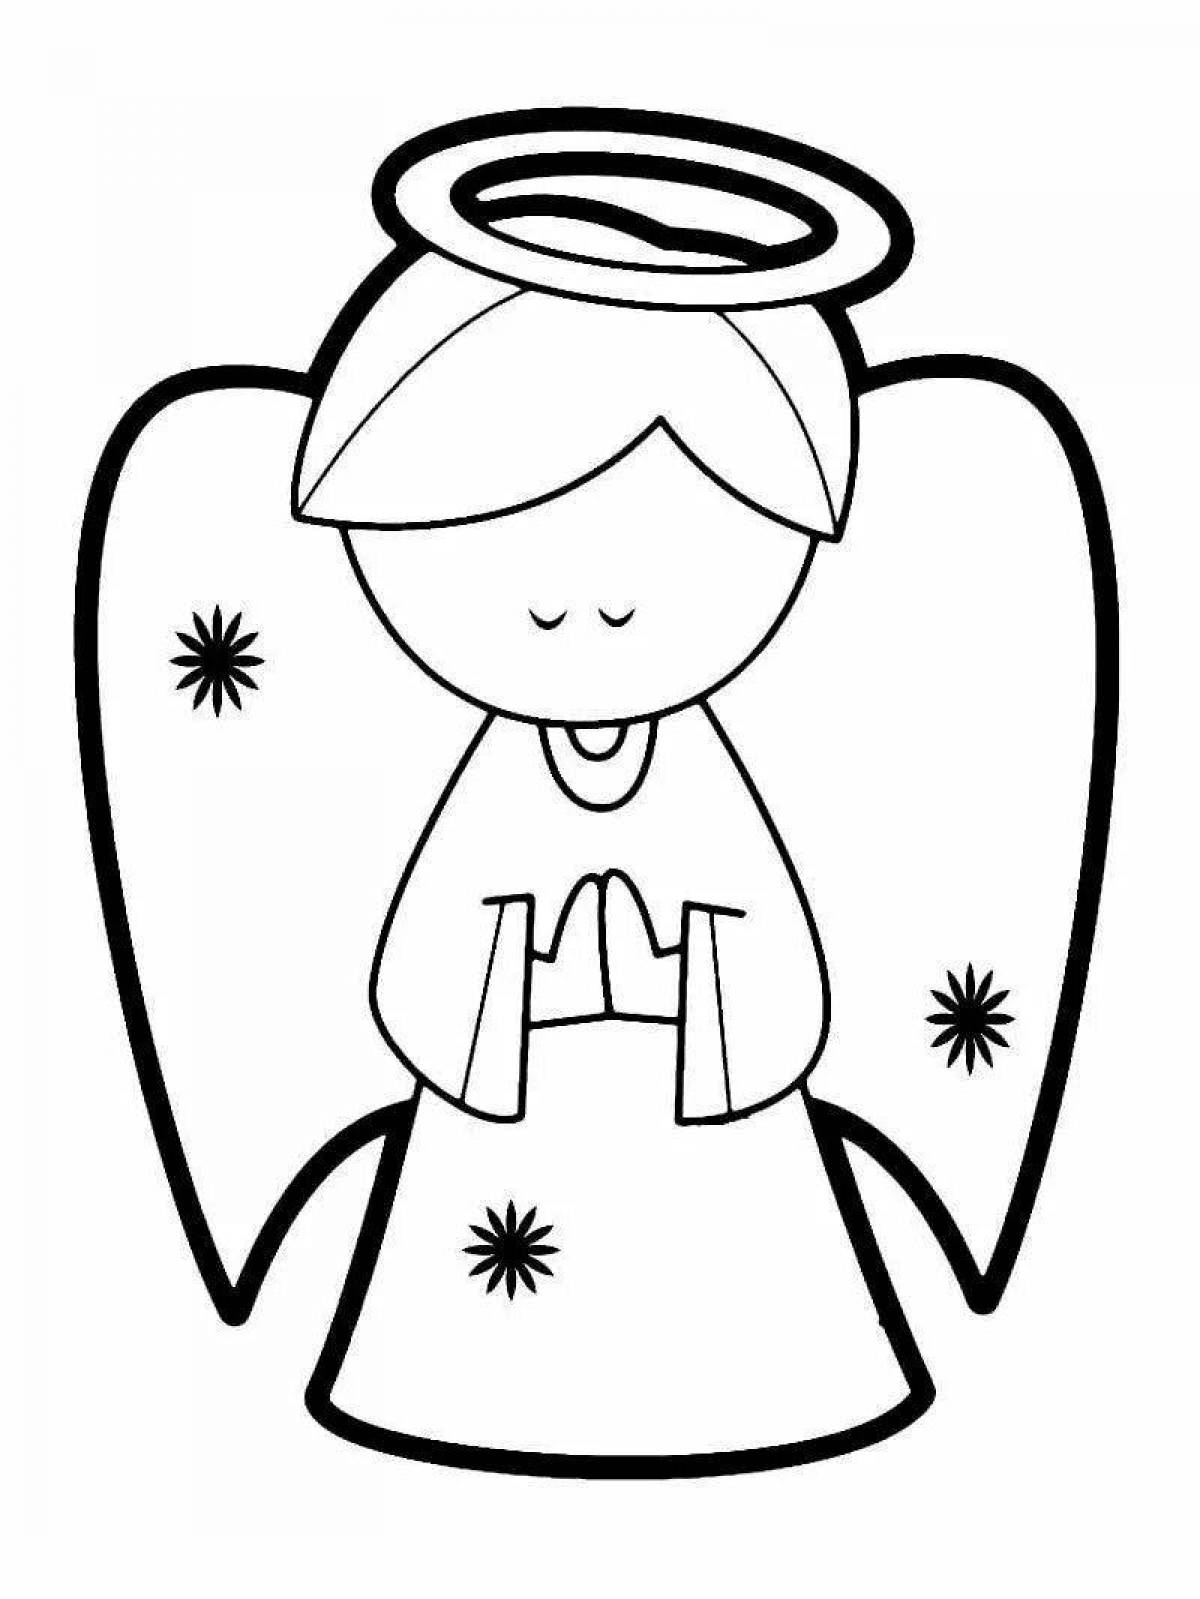 Sky angel coloring page